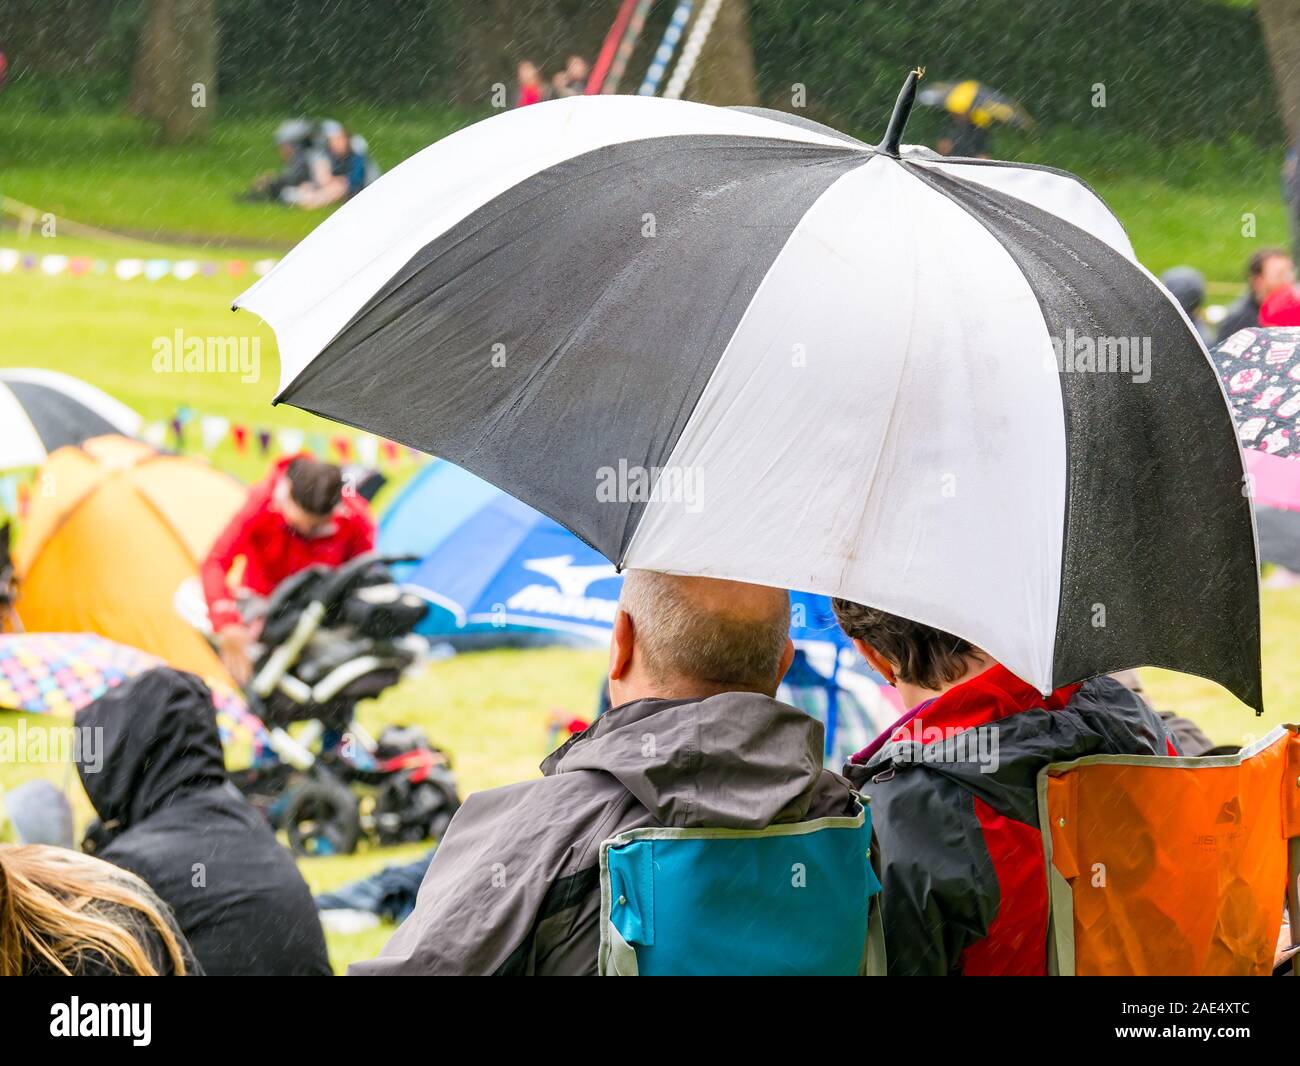 Couple sitting in fold up chairs under large striped umbrella watching outdoor event in the rain, Scotland, UK Stock Photo